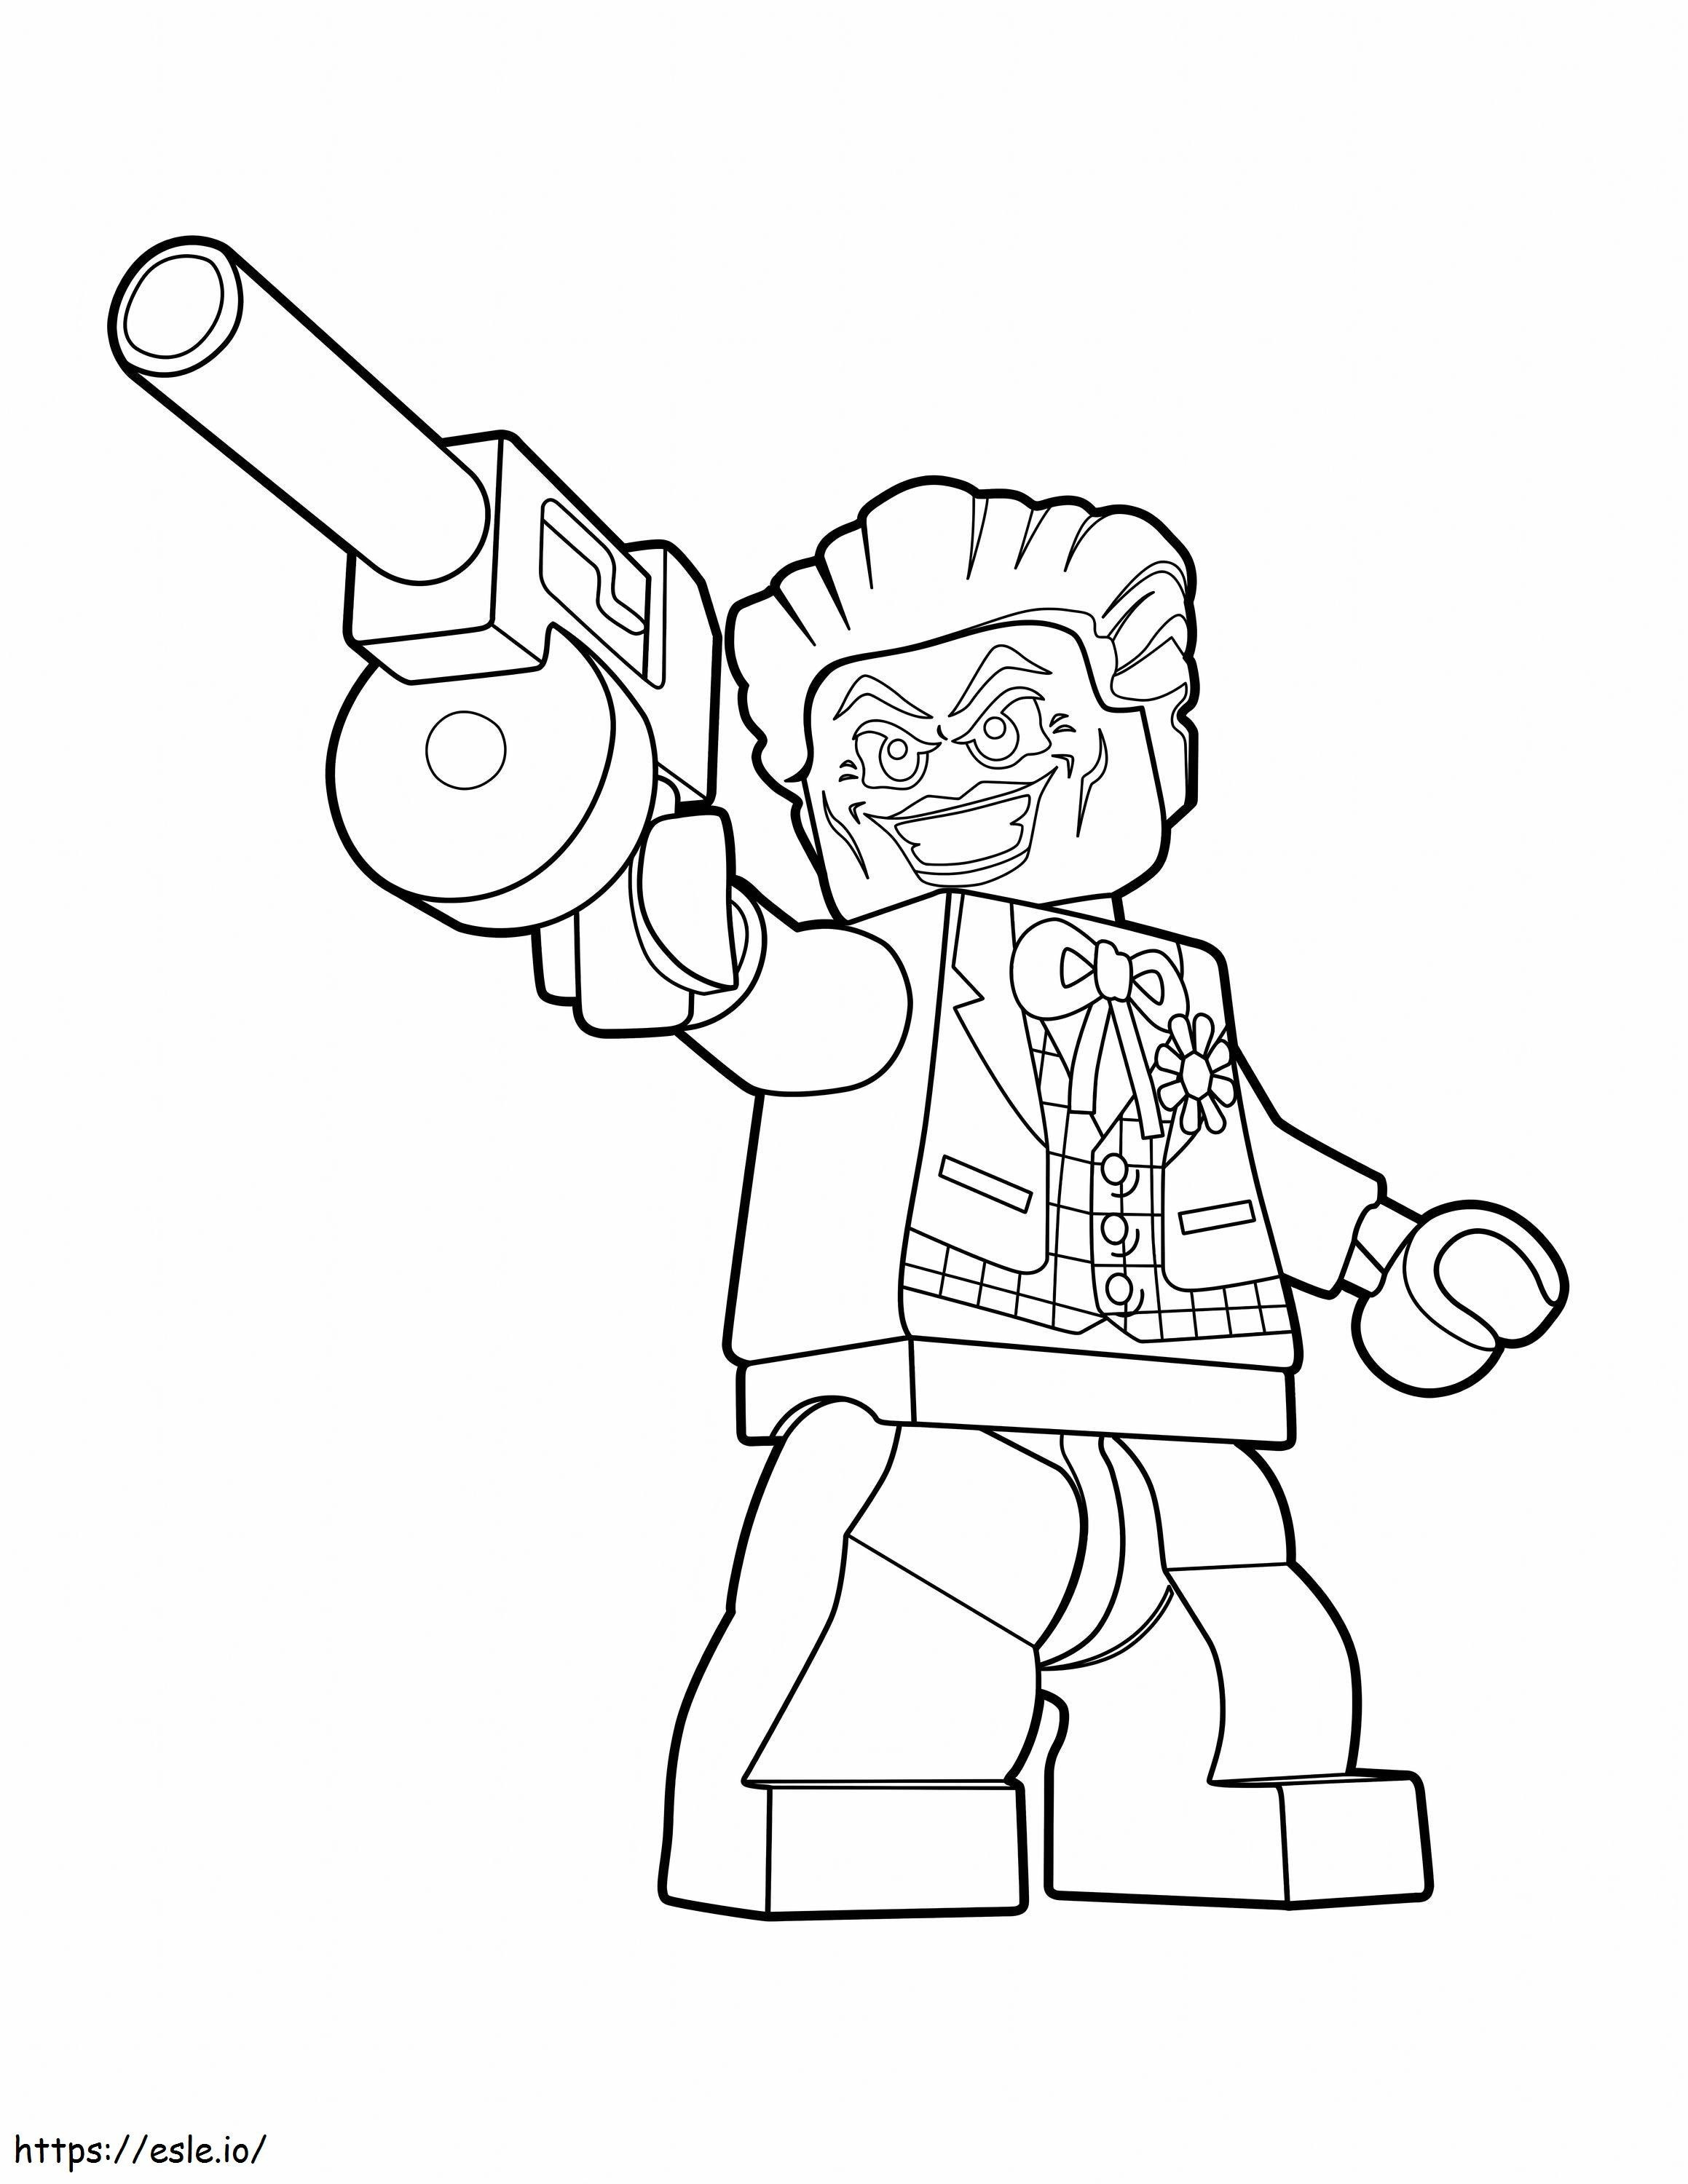 Lego Joker With Scaled Gun coloring page